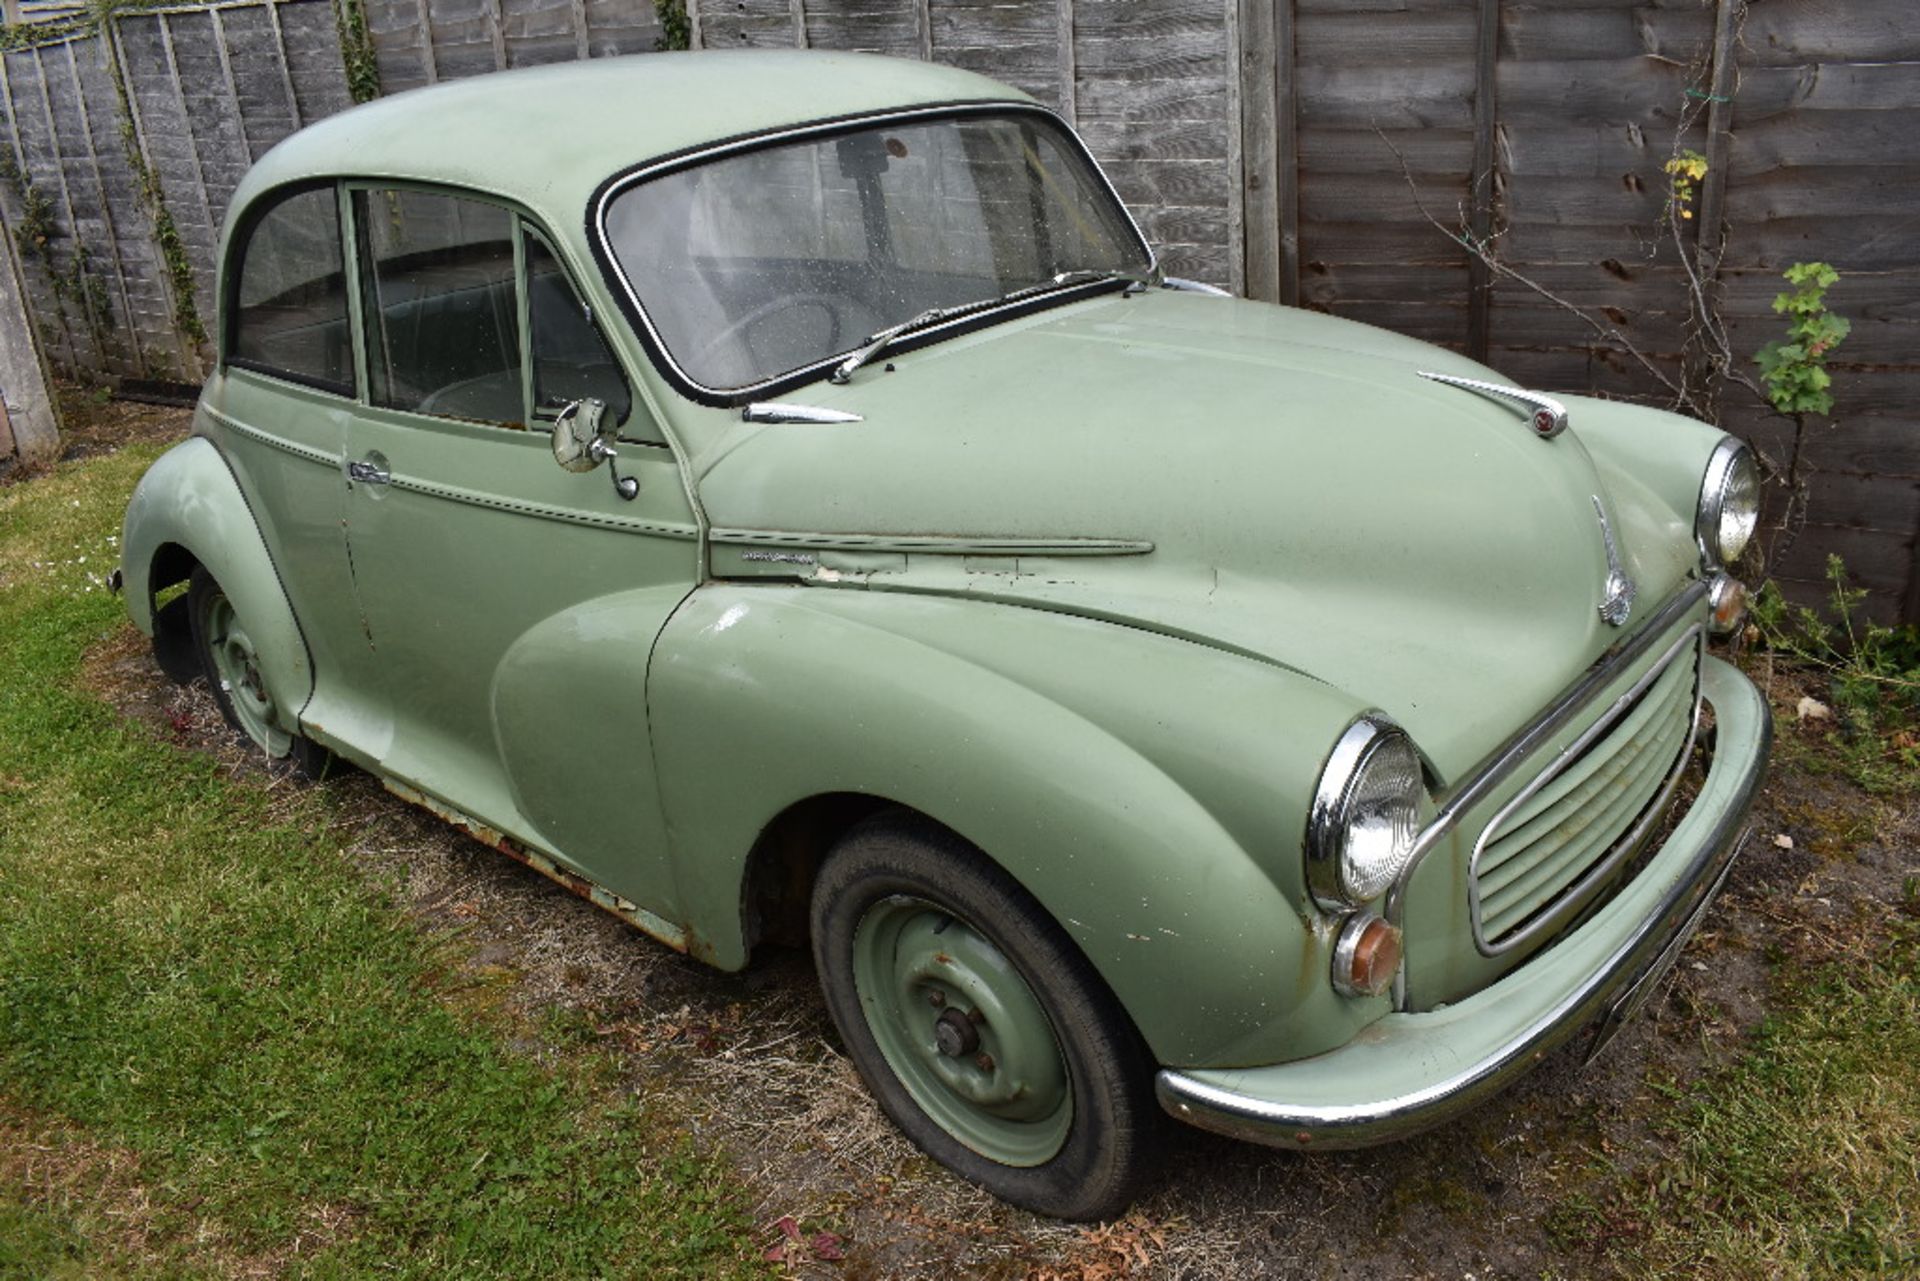 A 1956 Morris Minor two door saloon project, registration number URY 219, Porcelain green. This